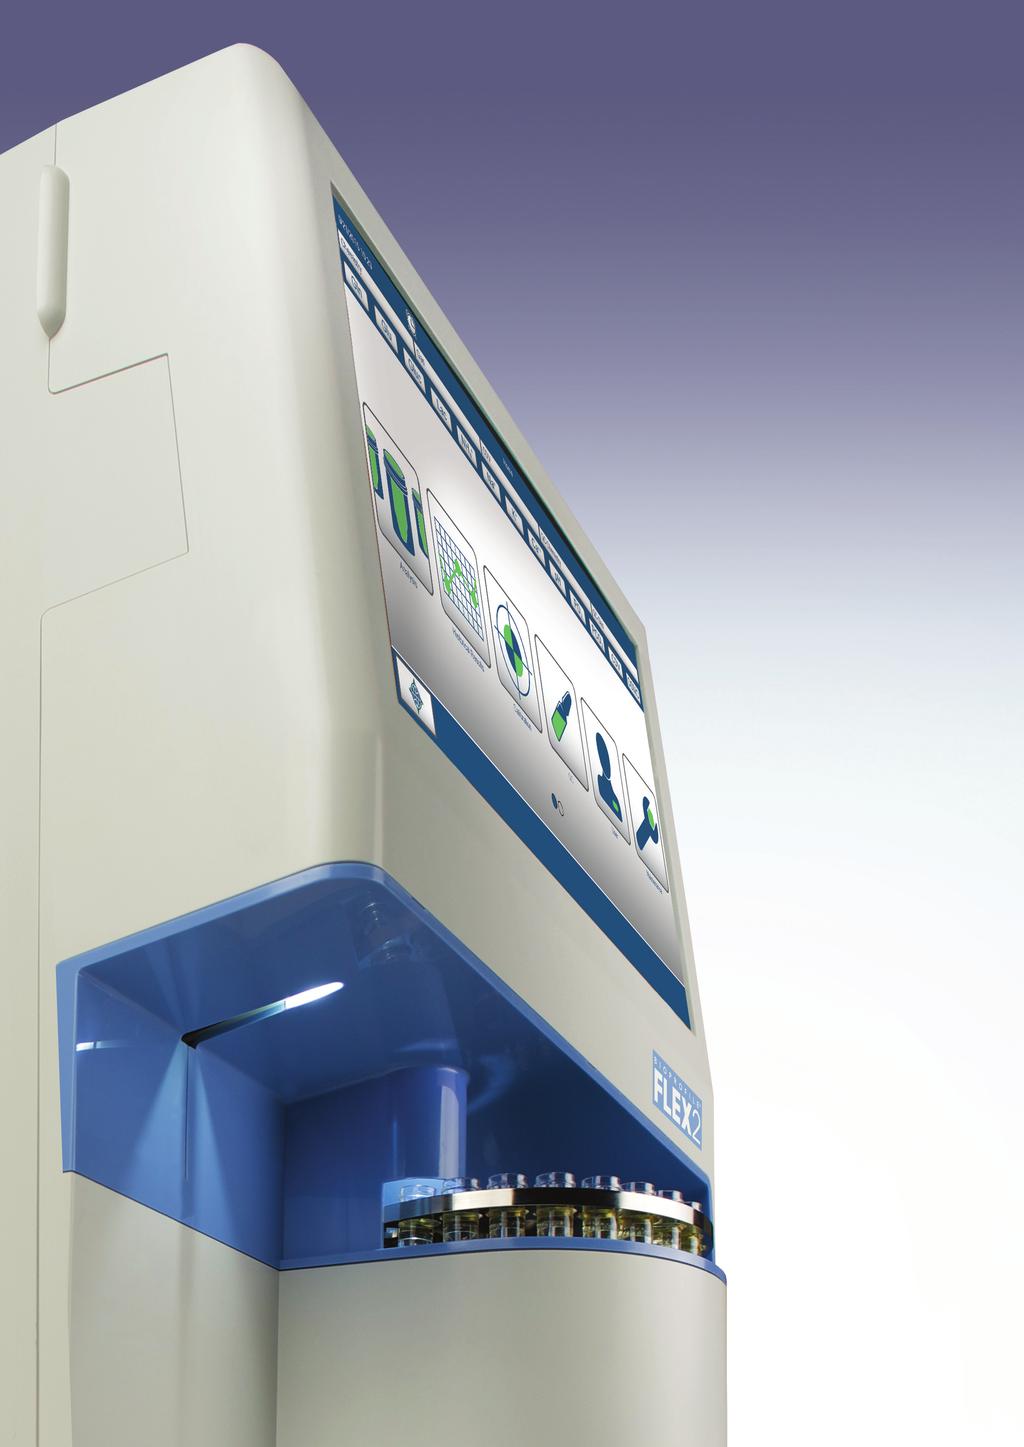 Up to 16 cell culture tests in one analyzer including chemistries, gases, cdv, and osmolality 11 chemistry tests with